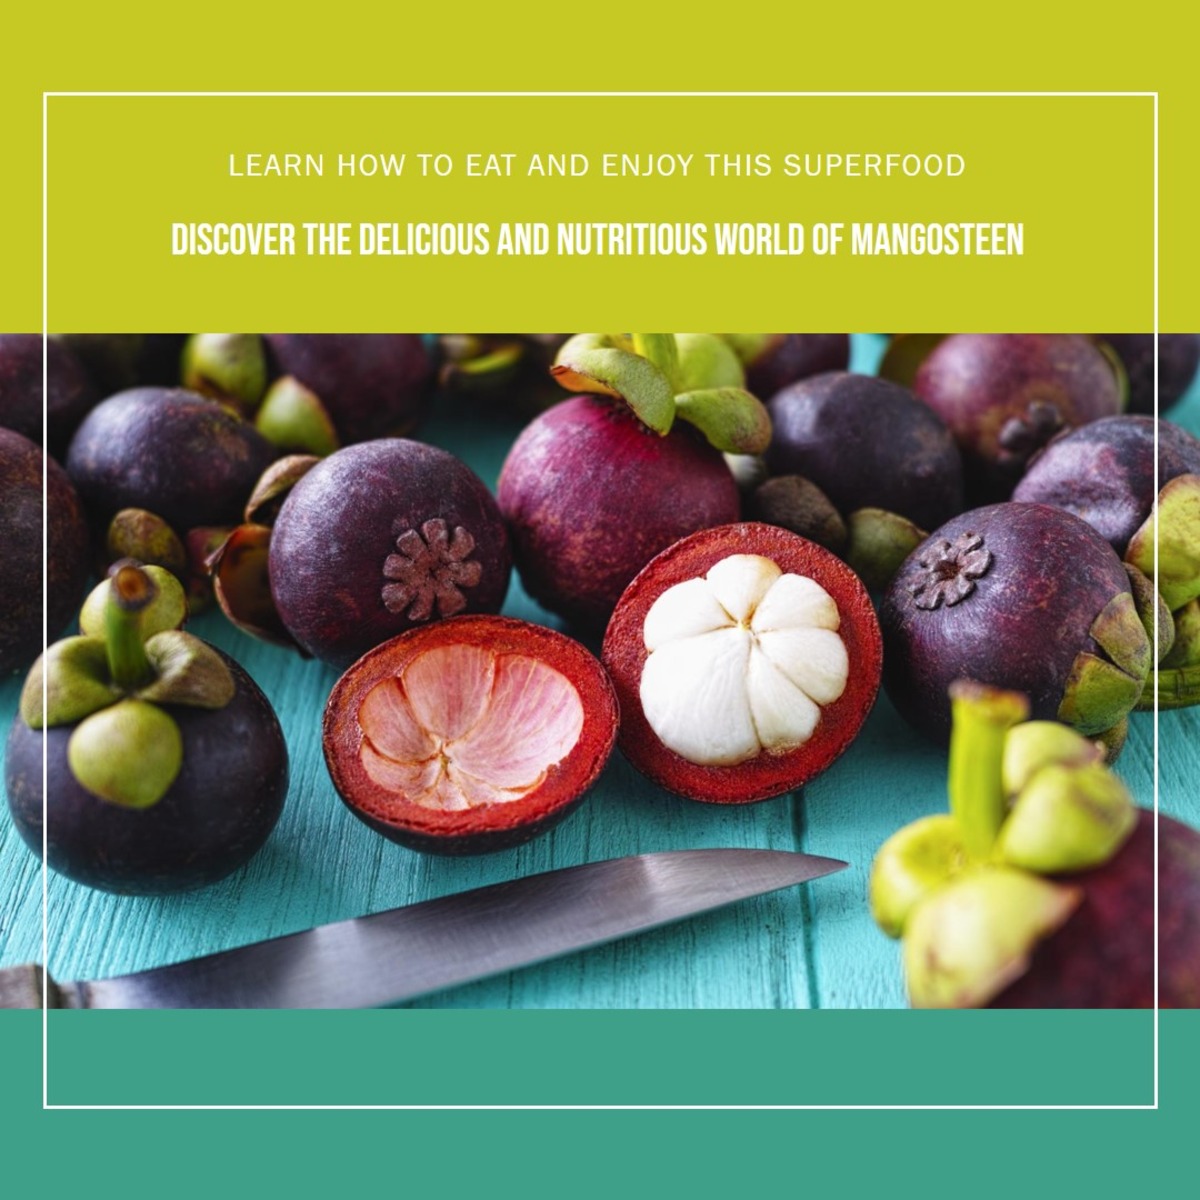 How to Eat Mangosteen?